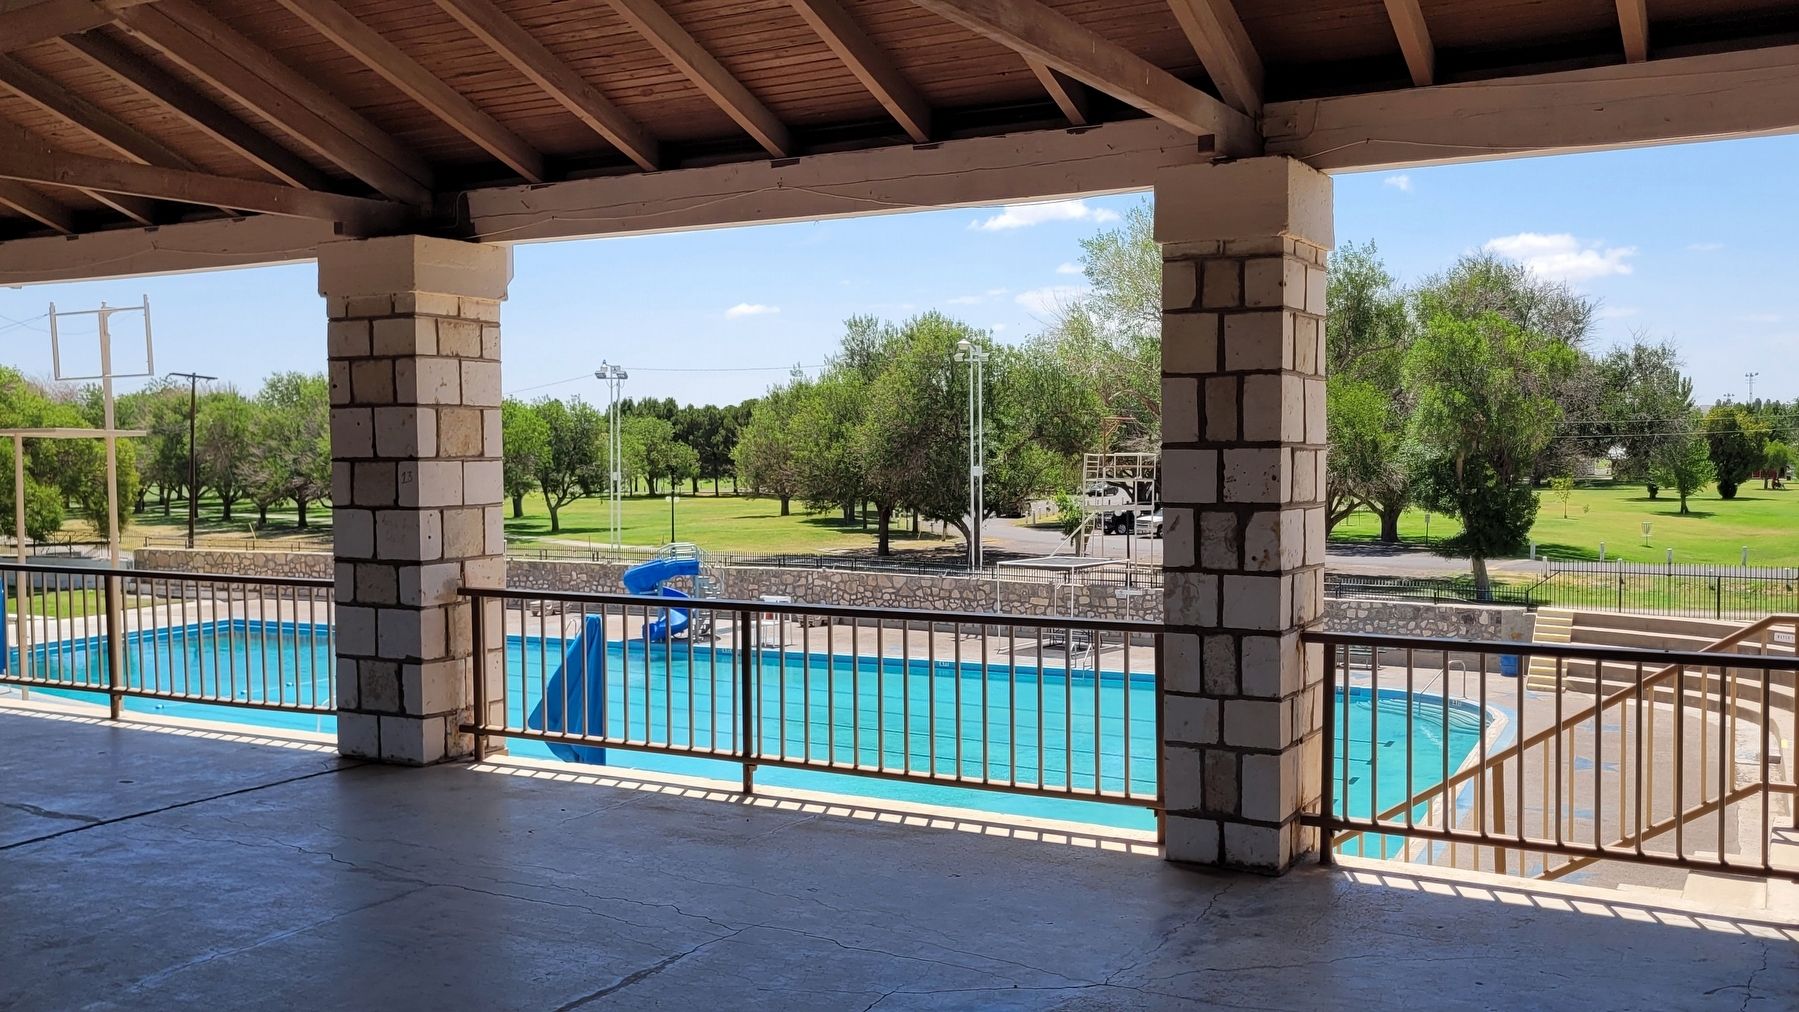 The Comanche Springs Pool image. Click for full size.